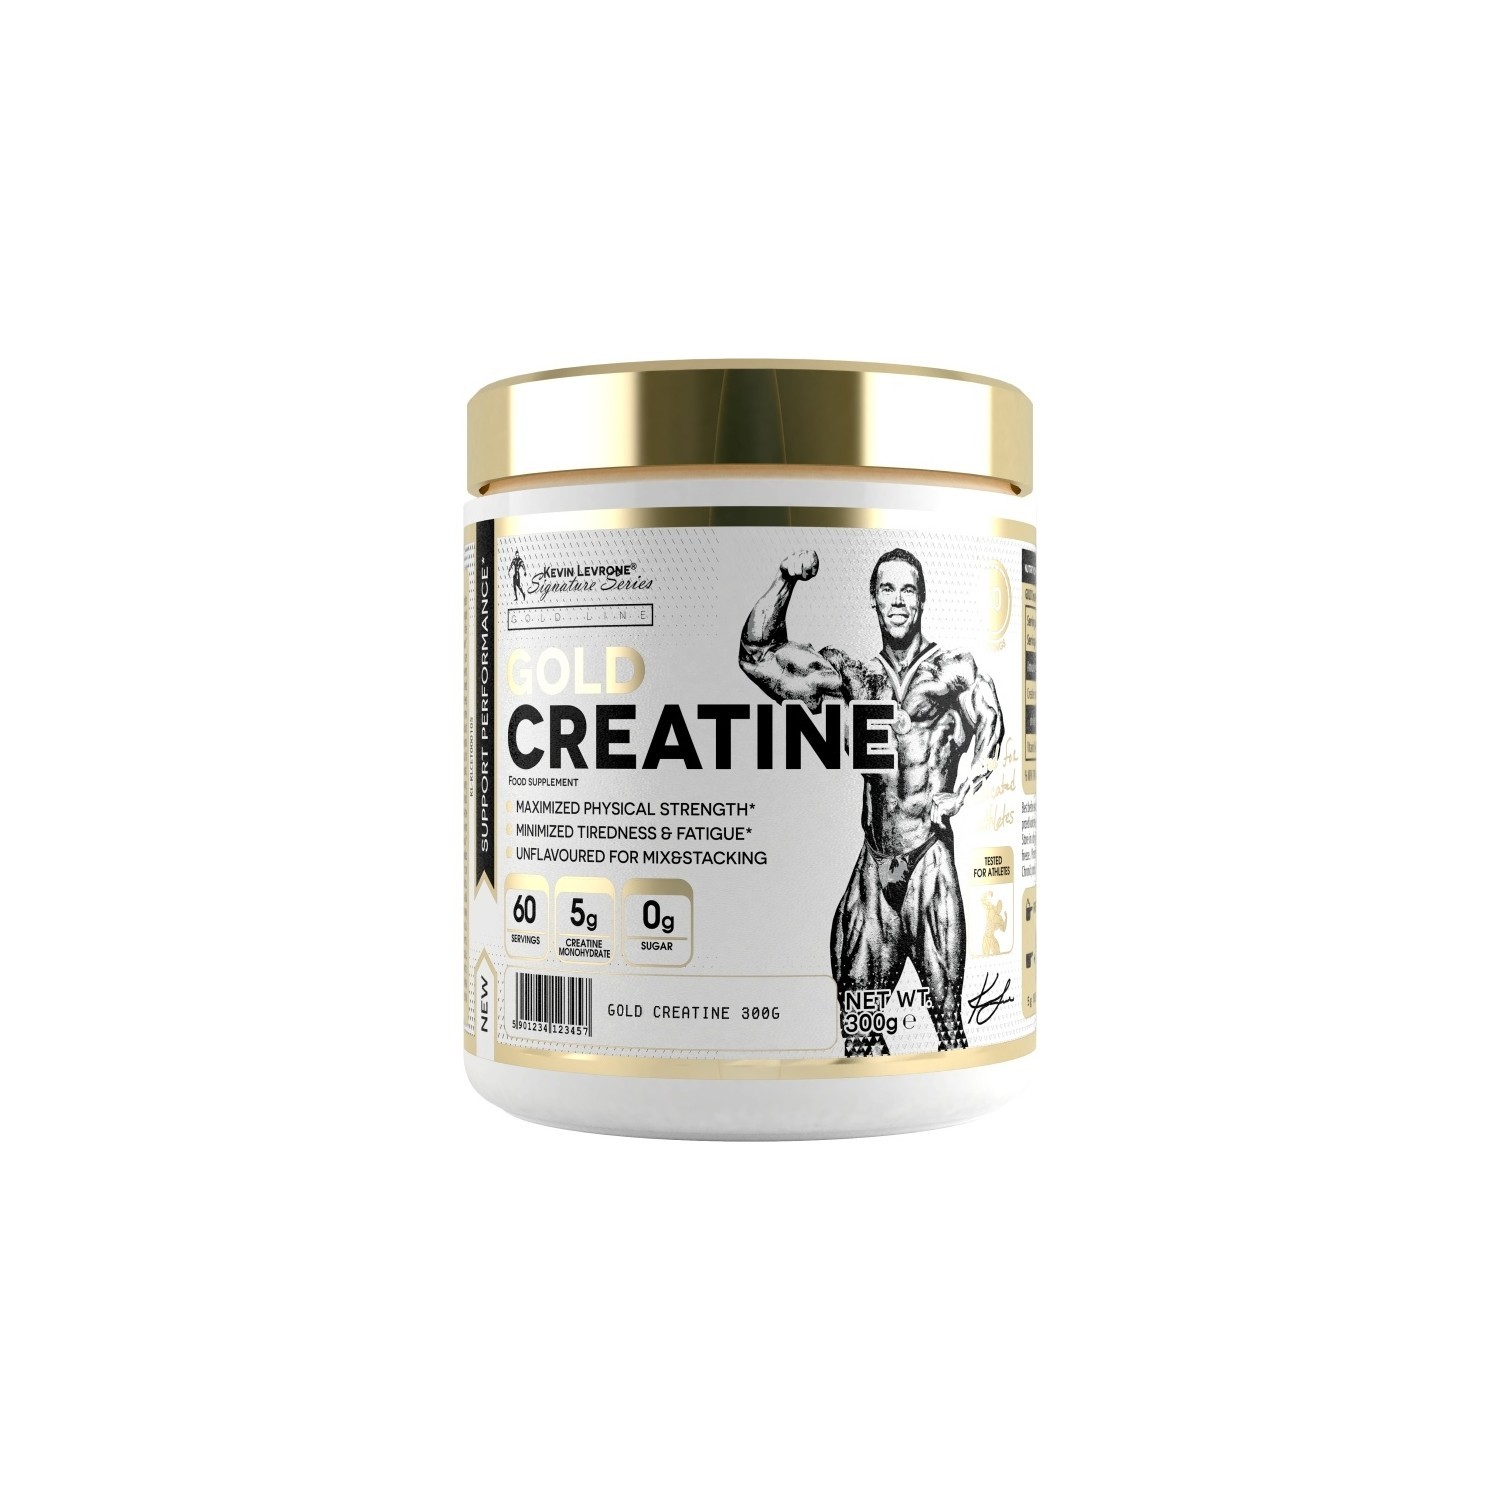 kevin levrone Gold Line / Gold Creatine Monohydrate 300 GRAM KEVİN LEVRONE CREATİNE 300